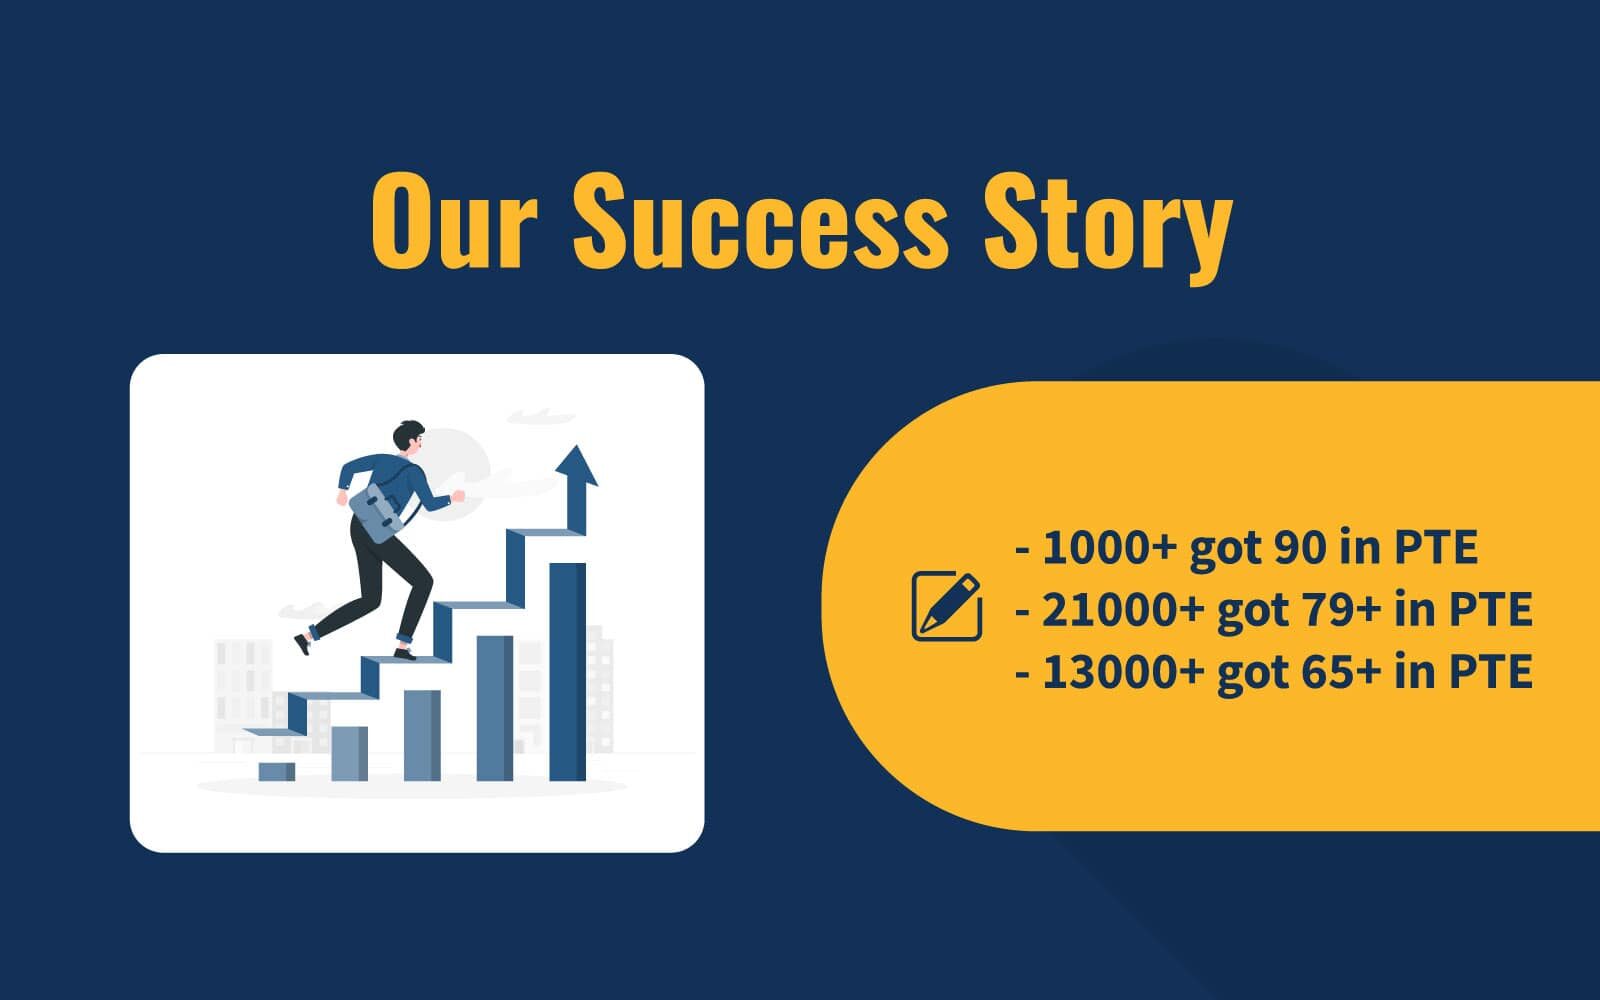 Our Success Story